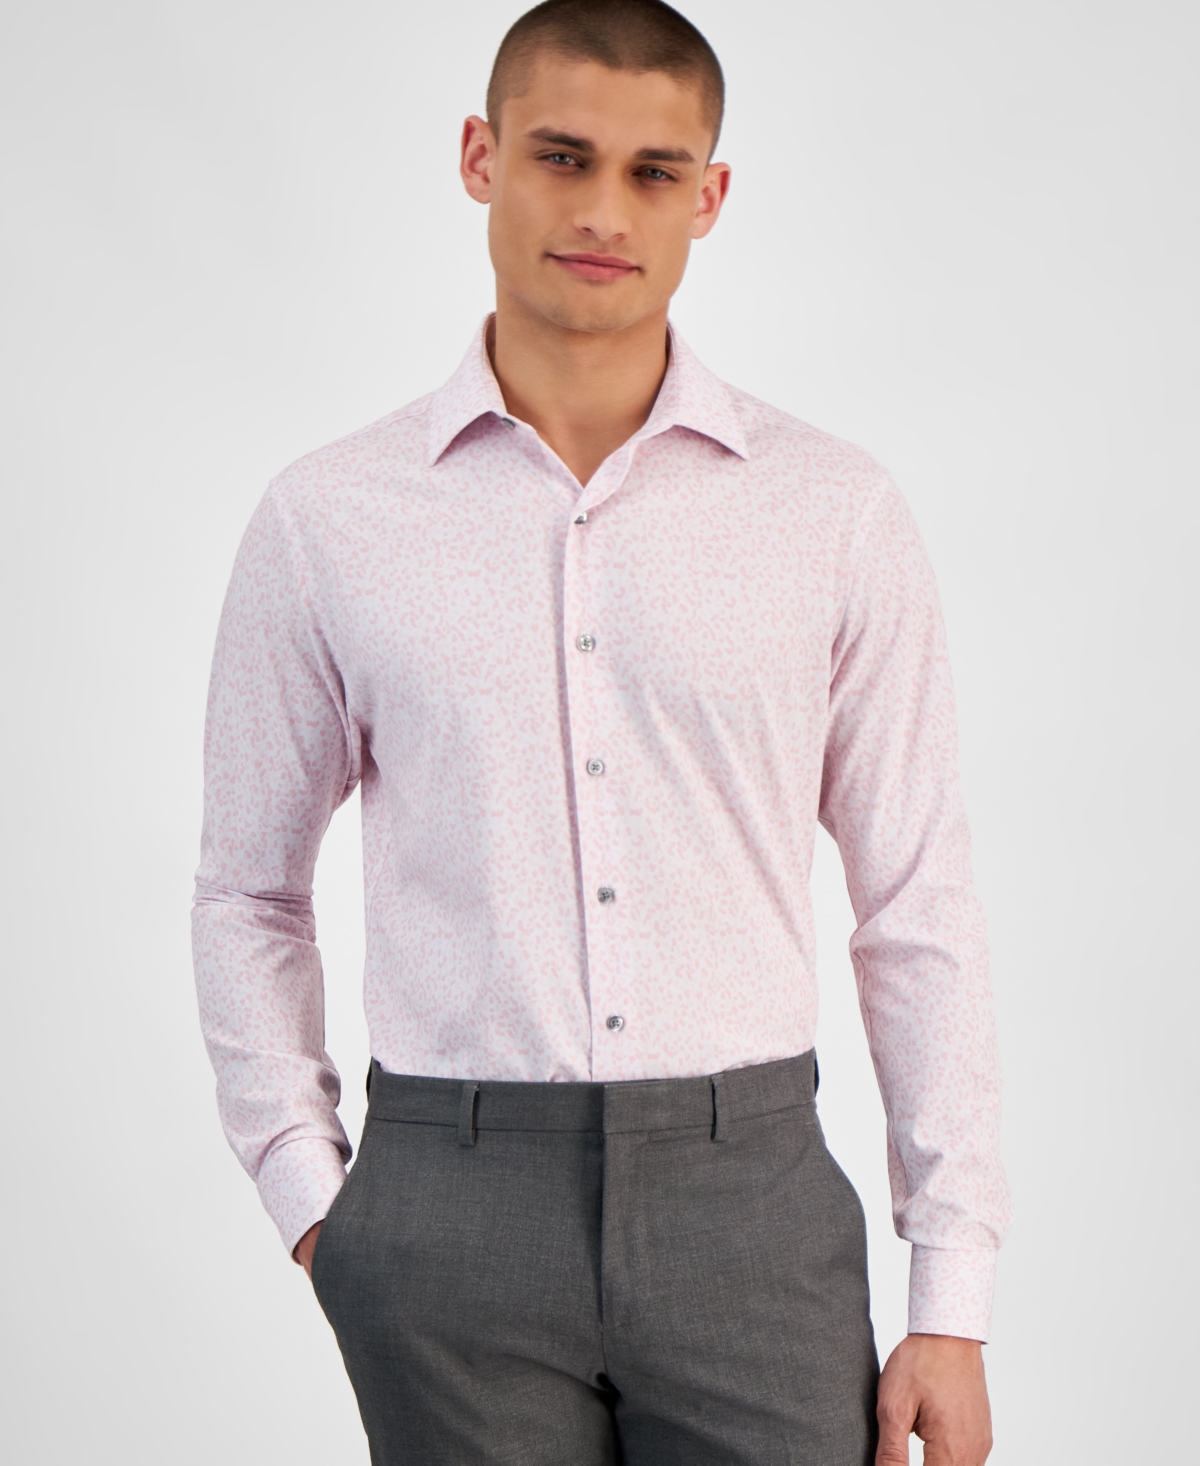 Men's Textured Dress Shirt, Created for Macy's - White Pink